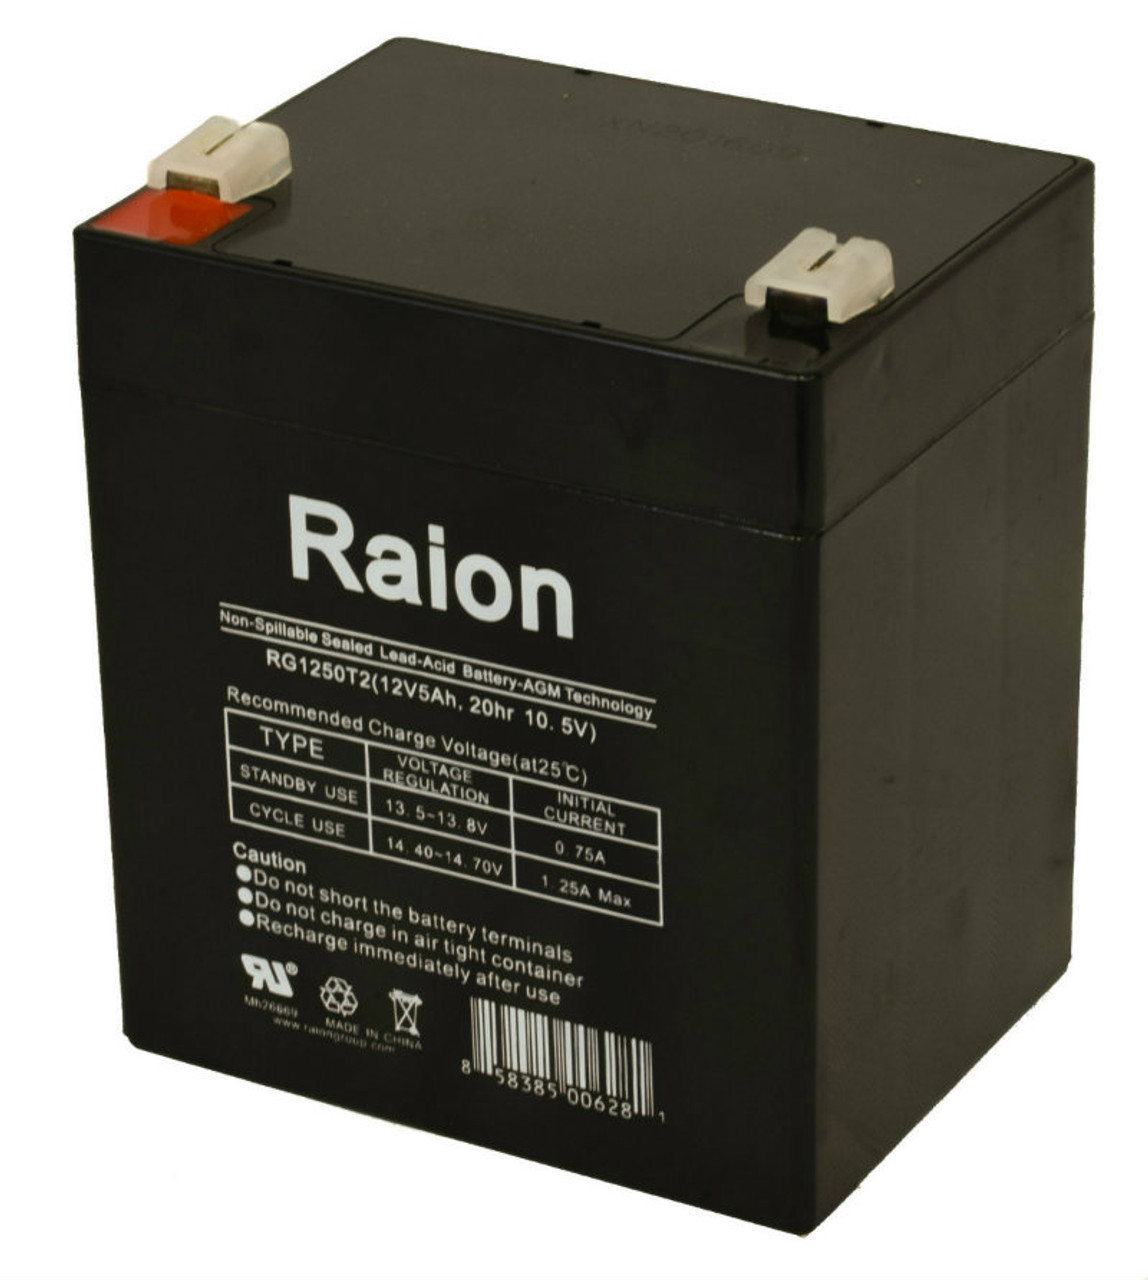 Raion Power RG1250T1 Replacement Alarm Security System Battery for ADT Security Safewatch Pro 2000